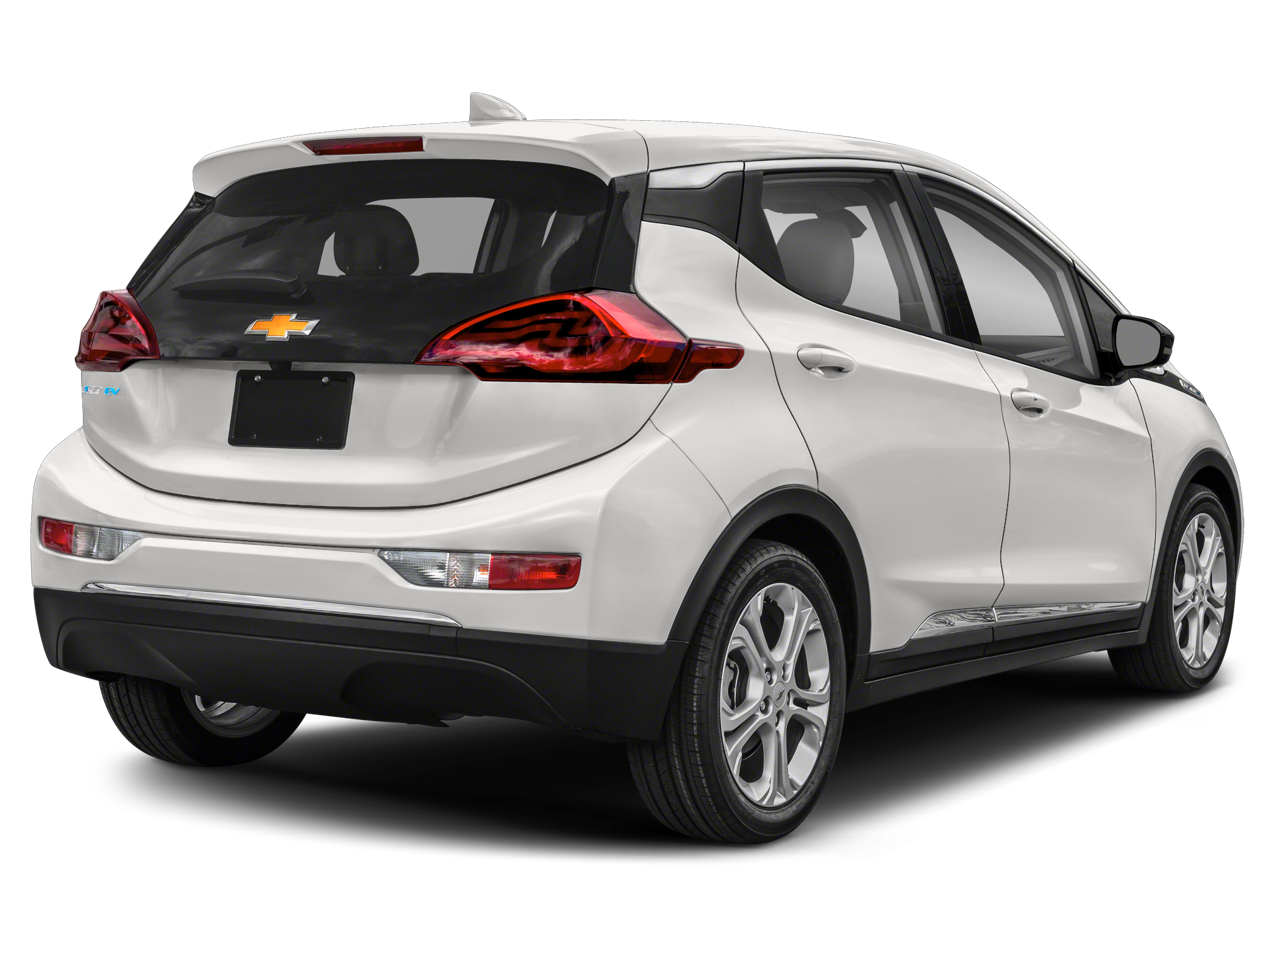 Used 2020 Chevrolet Bolt EV LT with VIN 1G1FY6S04L4149116 for sale in Upland, CA